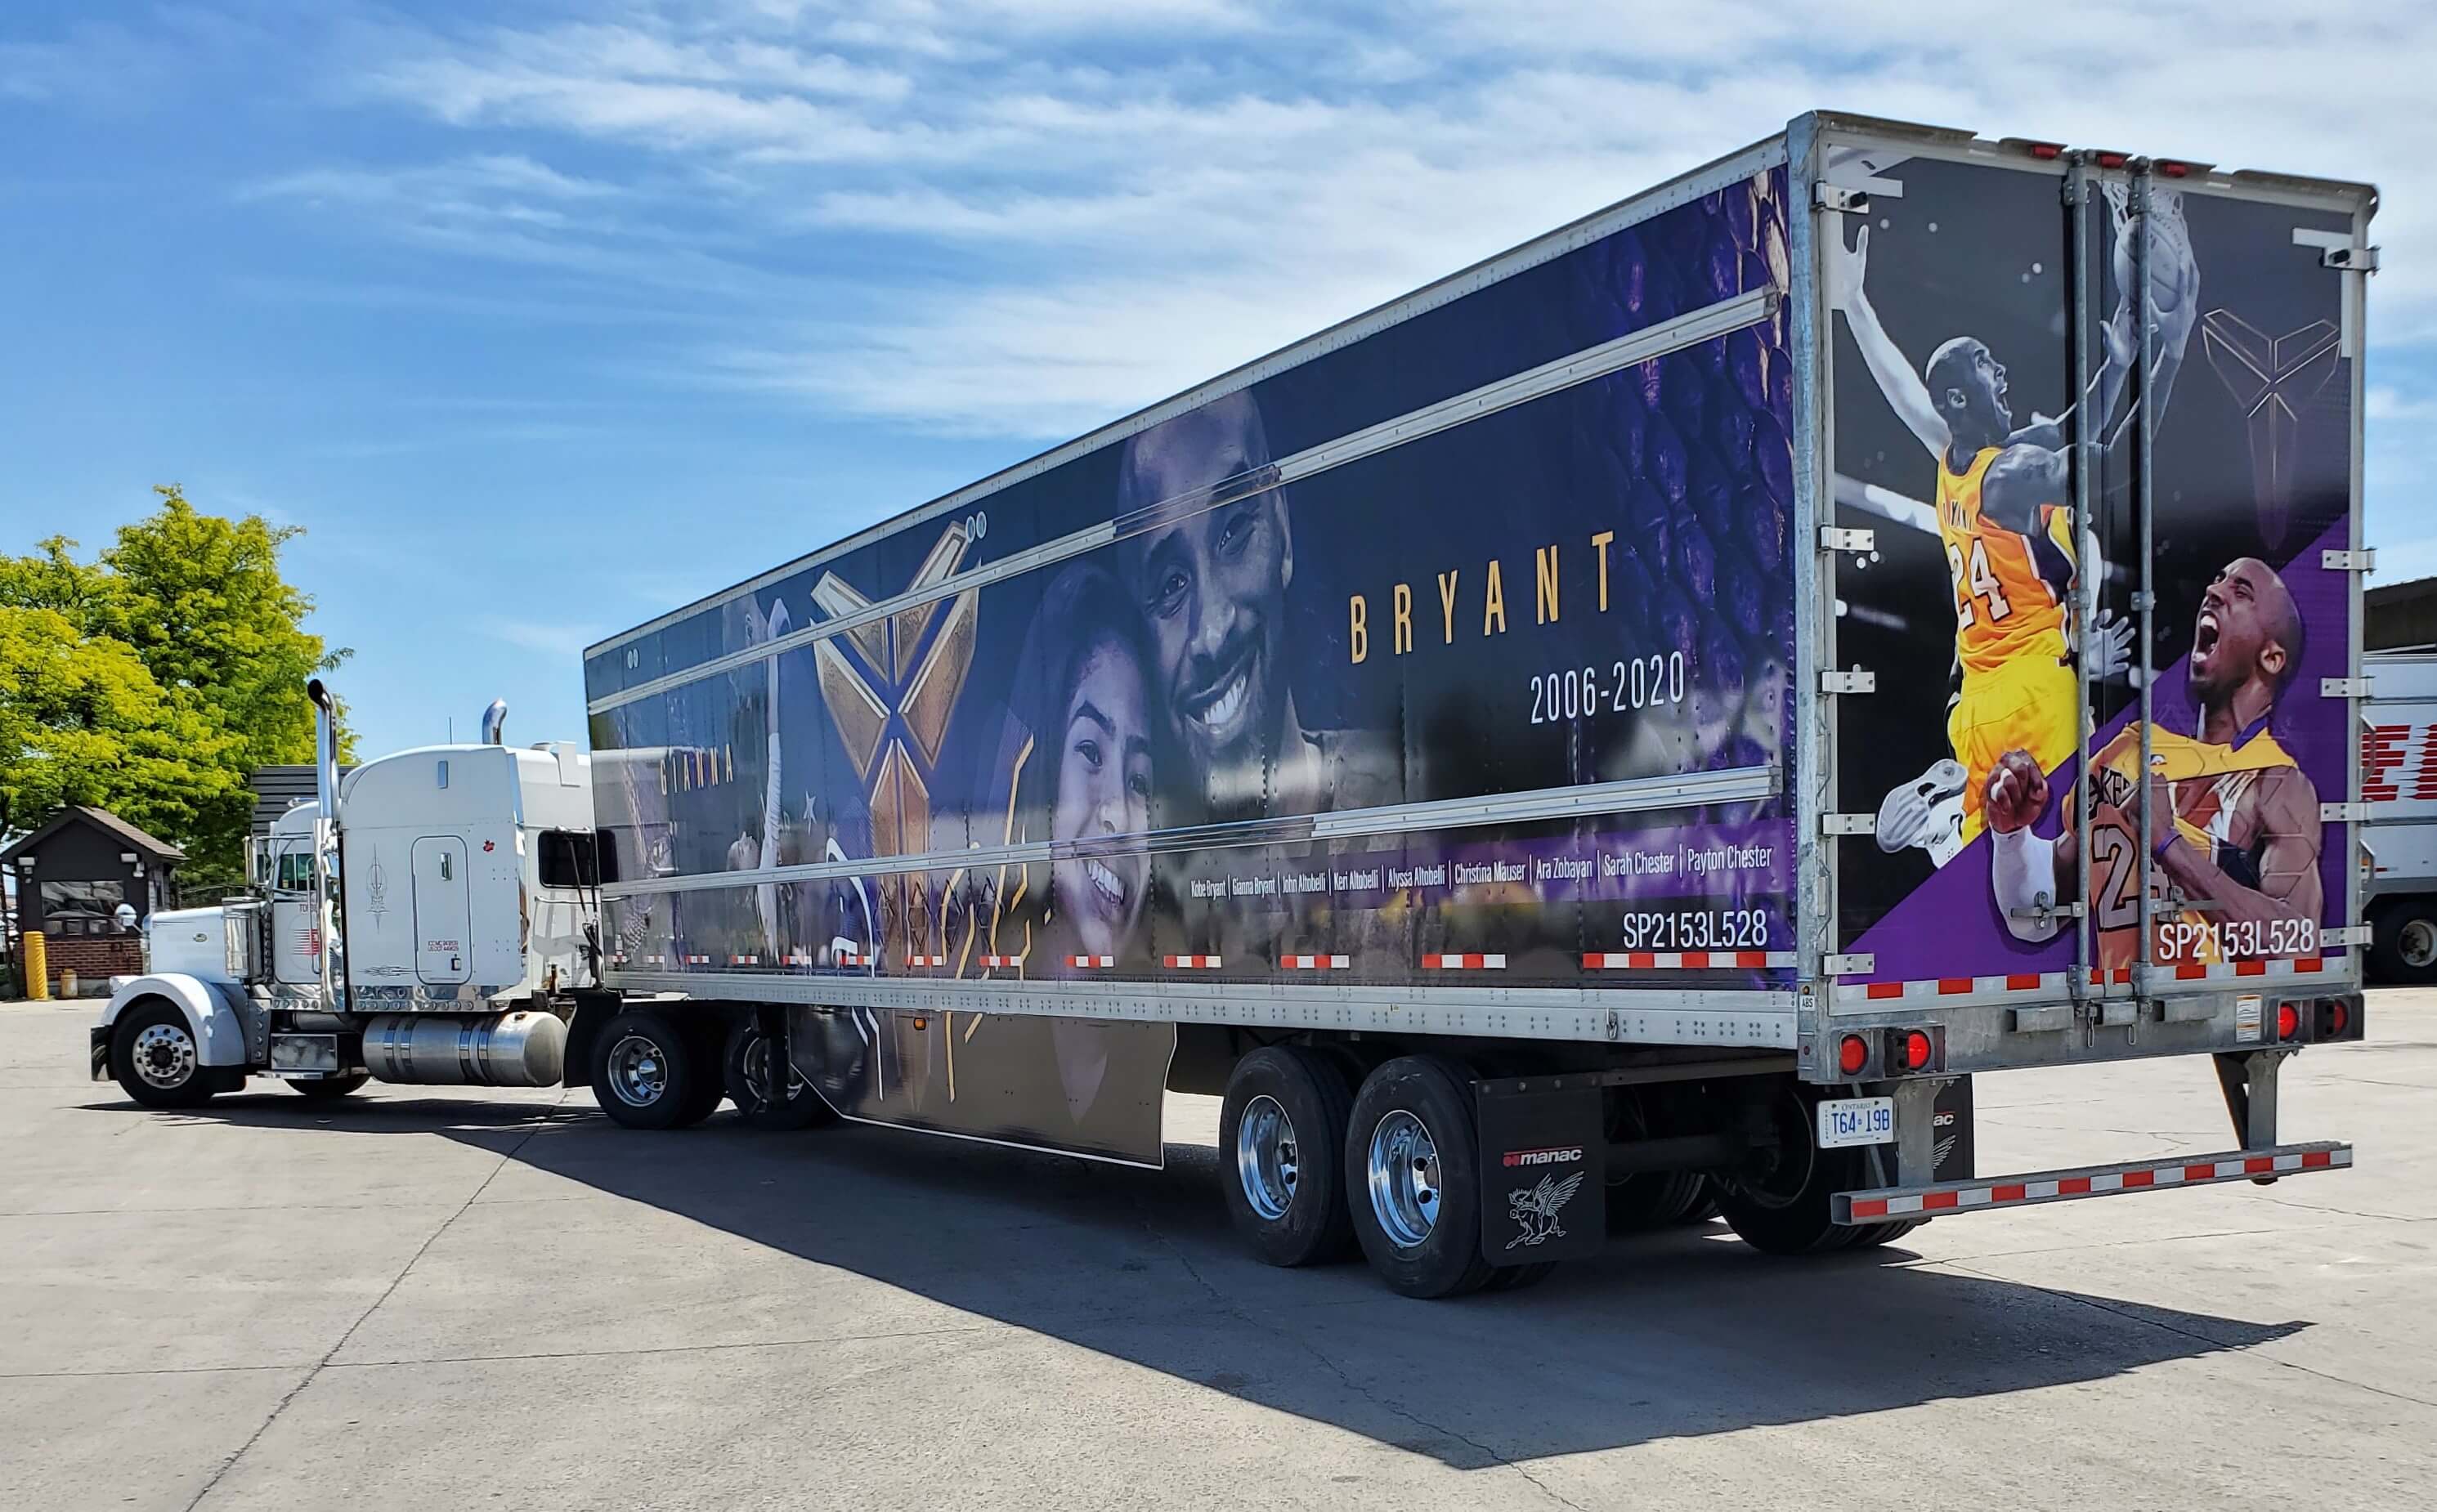 Rear view of a trailer wrap of Kobe Bryant by Turbo Images the leader in trailer wraps for awesome trailer wraps. For a great design and custom vinyl truck or trailer wrapping job, contact Turbo Images.